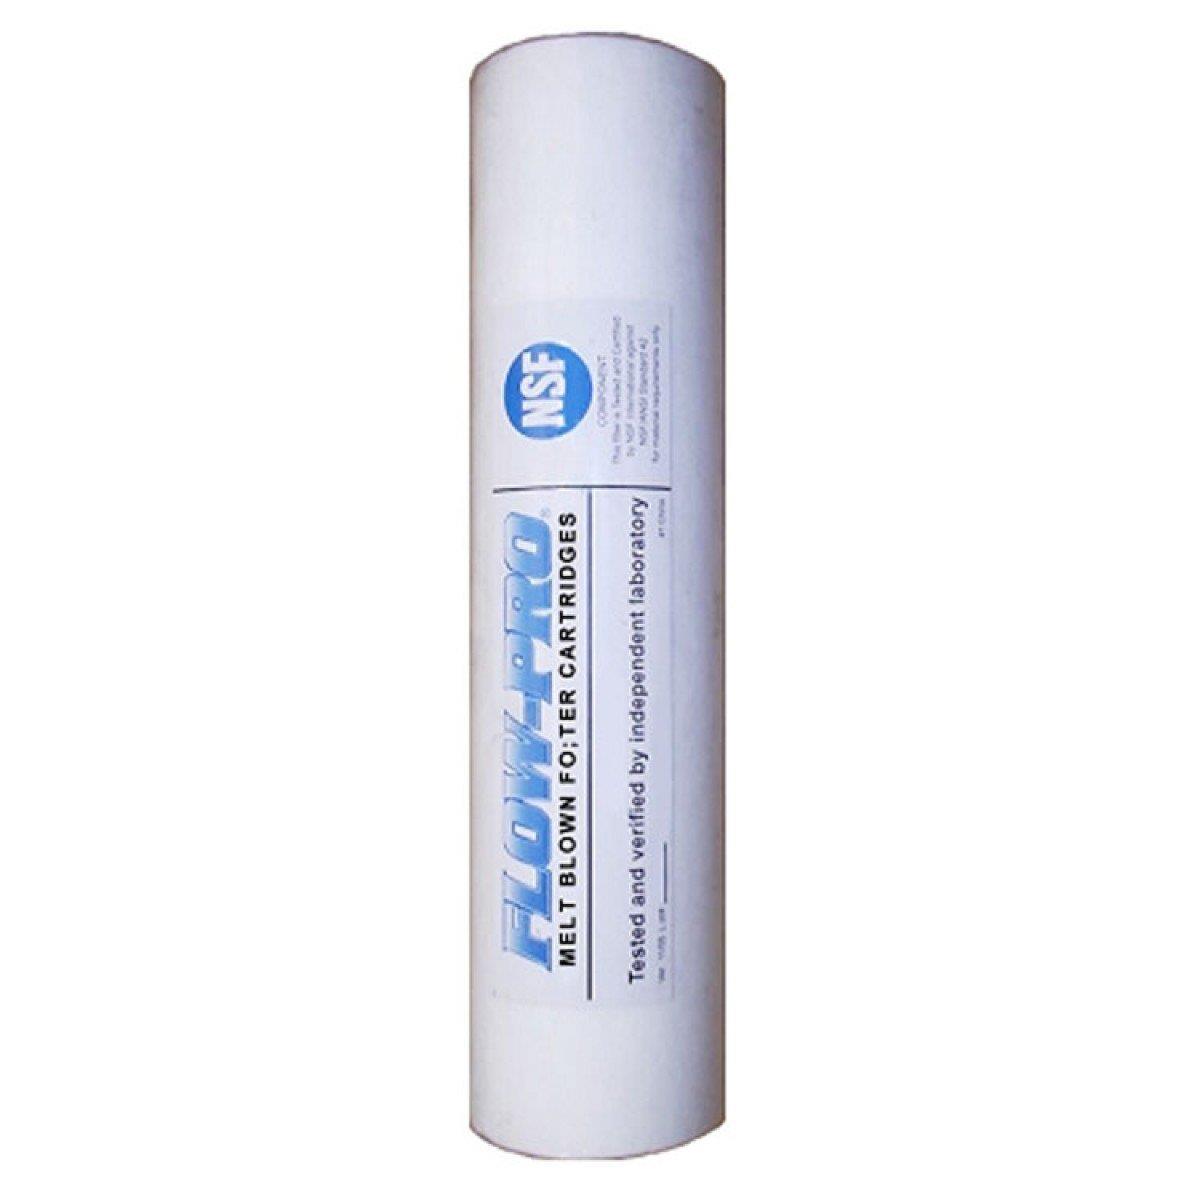 WATTS-FPMB20-978 Flo-Pro Sediment Replacement Filter Cartridge -  Commercial Water Distributing